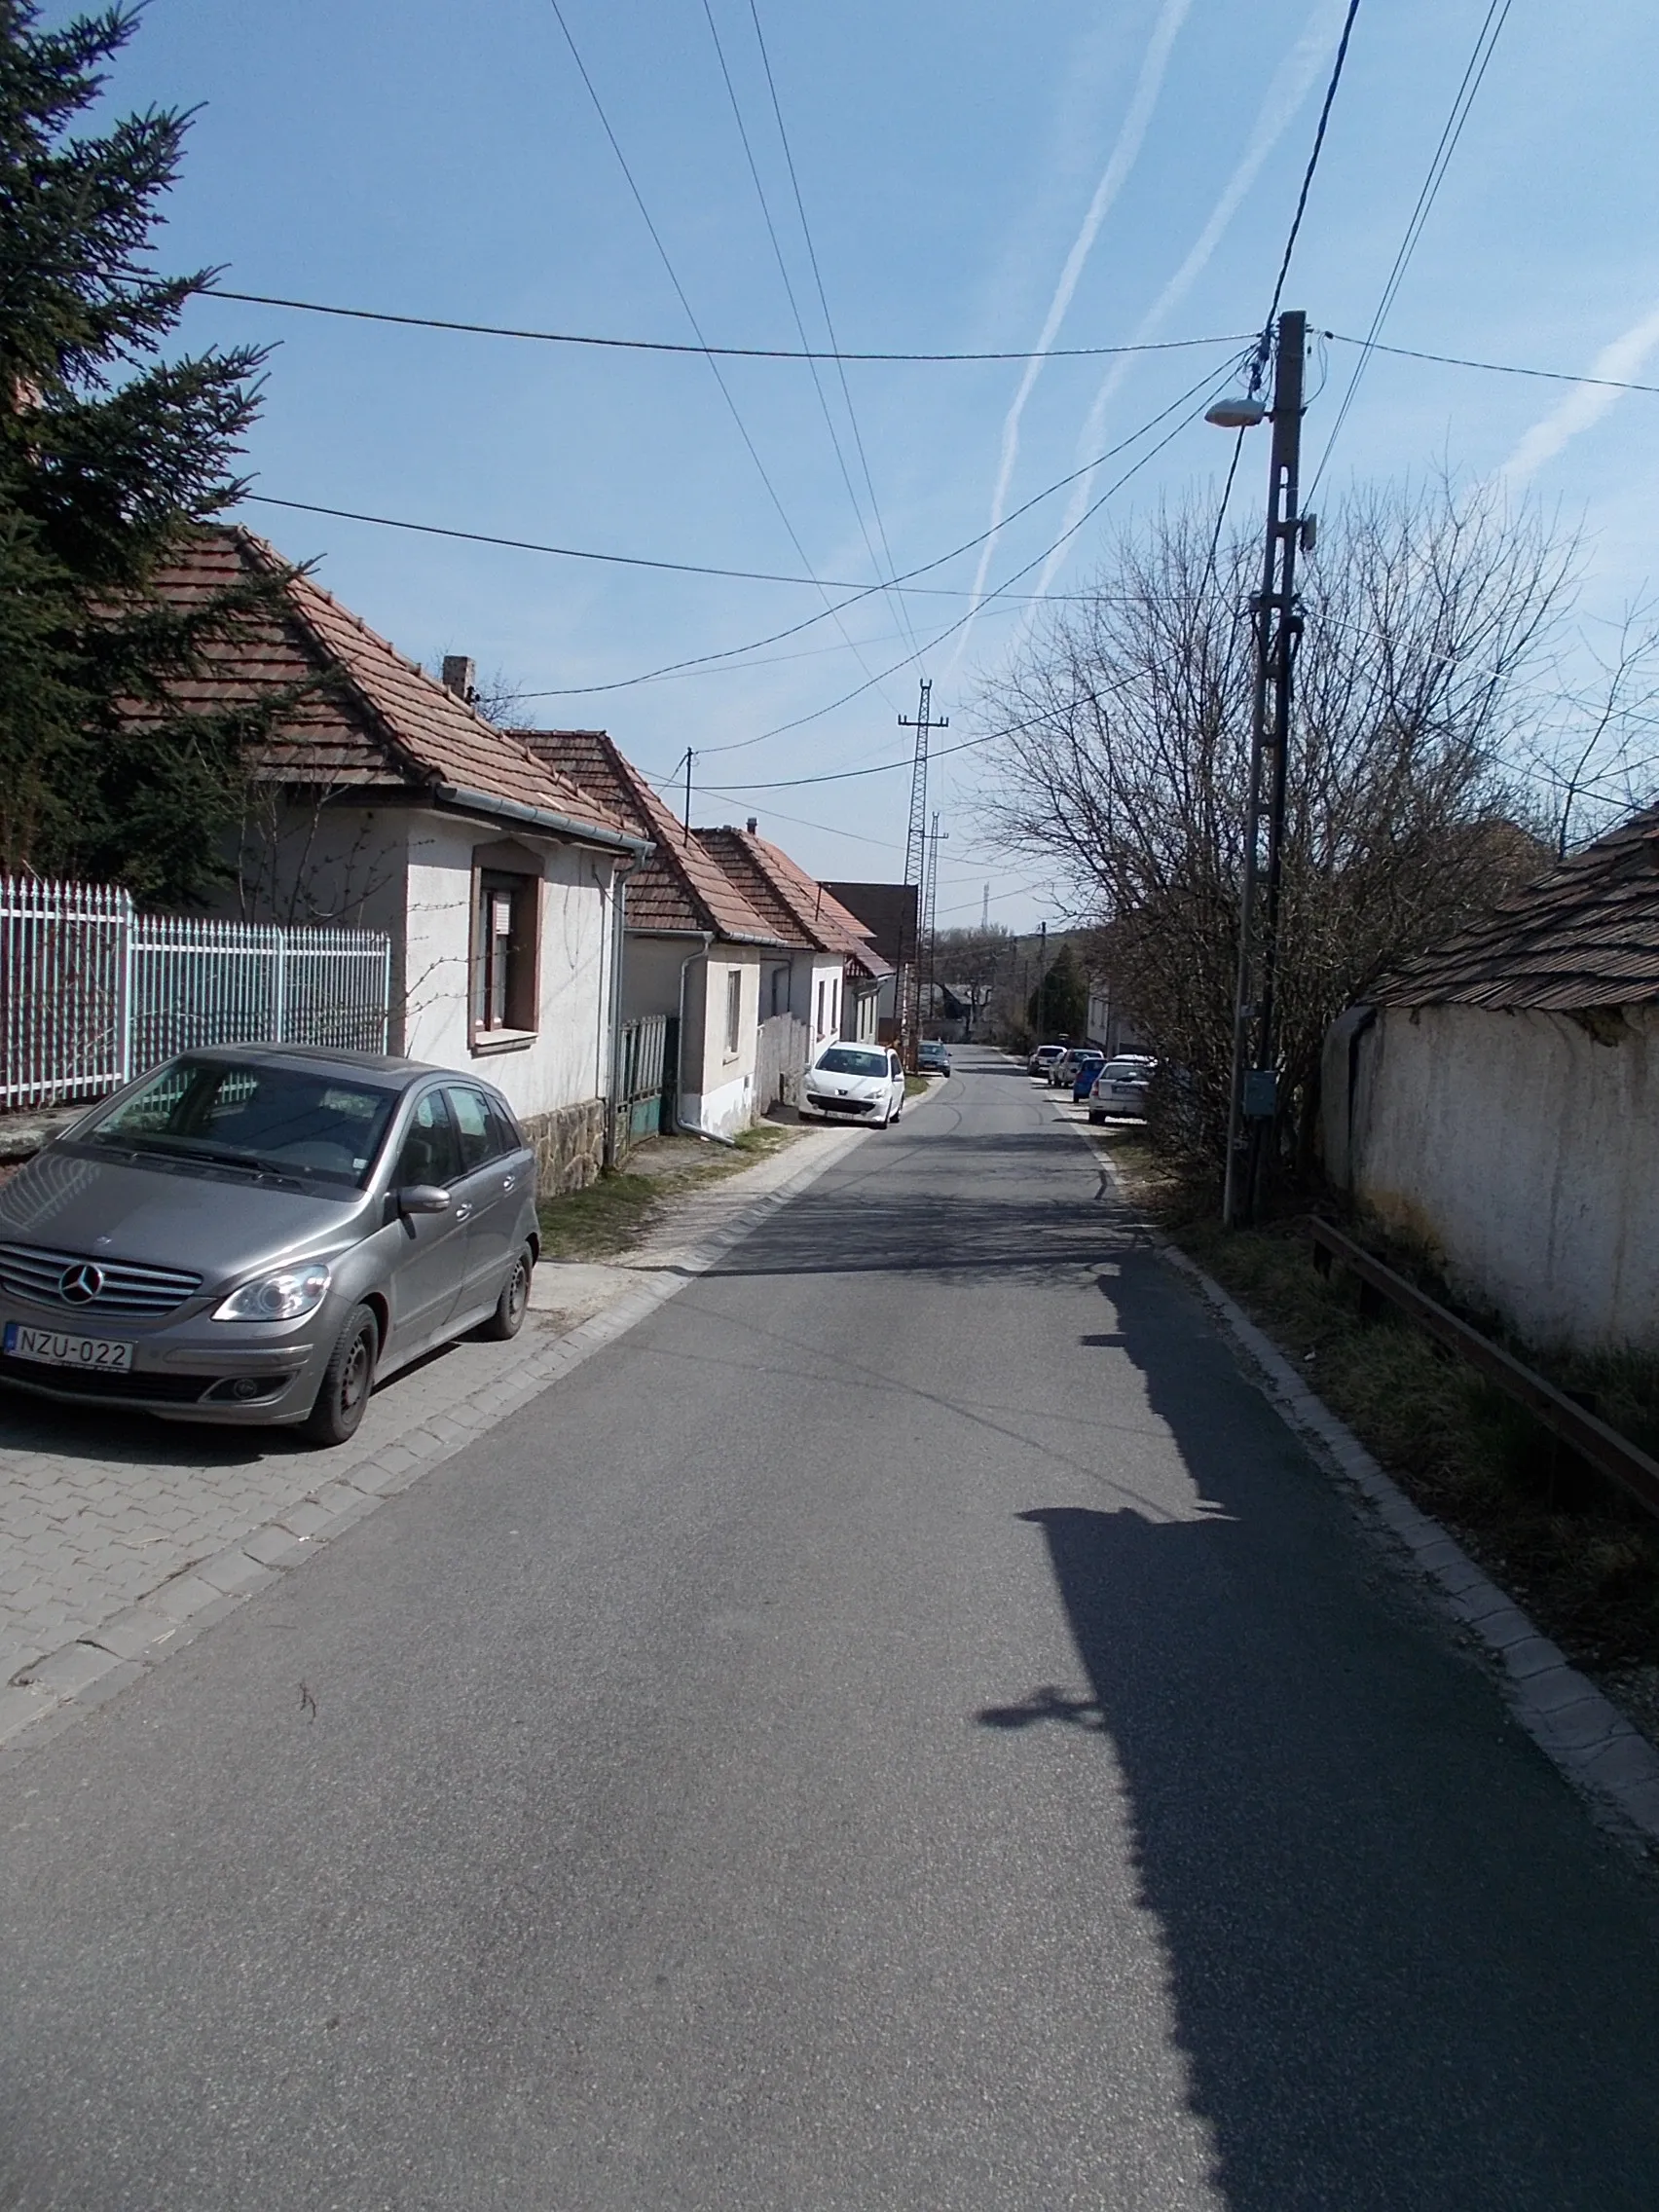 Photo showing: From north end of Petőfi Sándor (Šelpice) Street (full lenght of this street is part of the National Blue Trail section 15, and the blue mountain bike trail), Pilisszentkereszt, Pest County, Hungary.